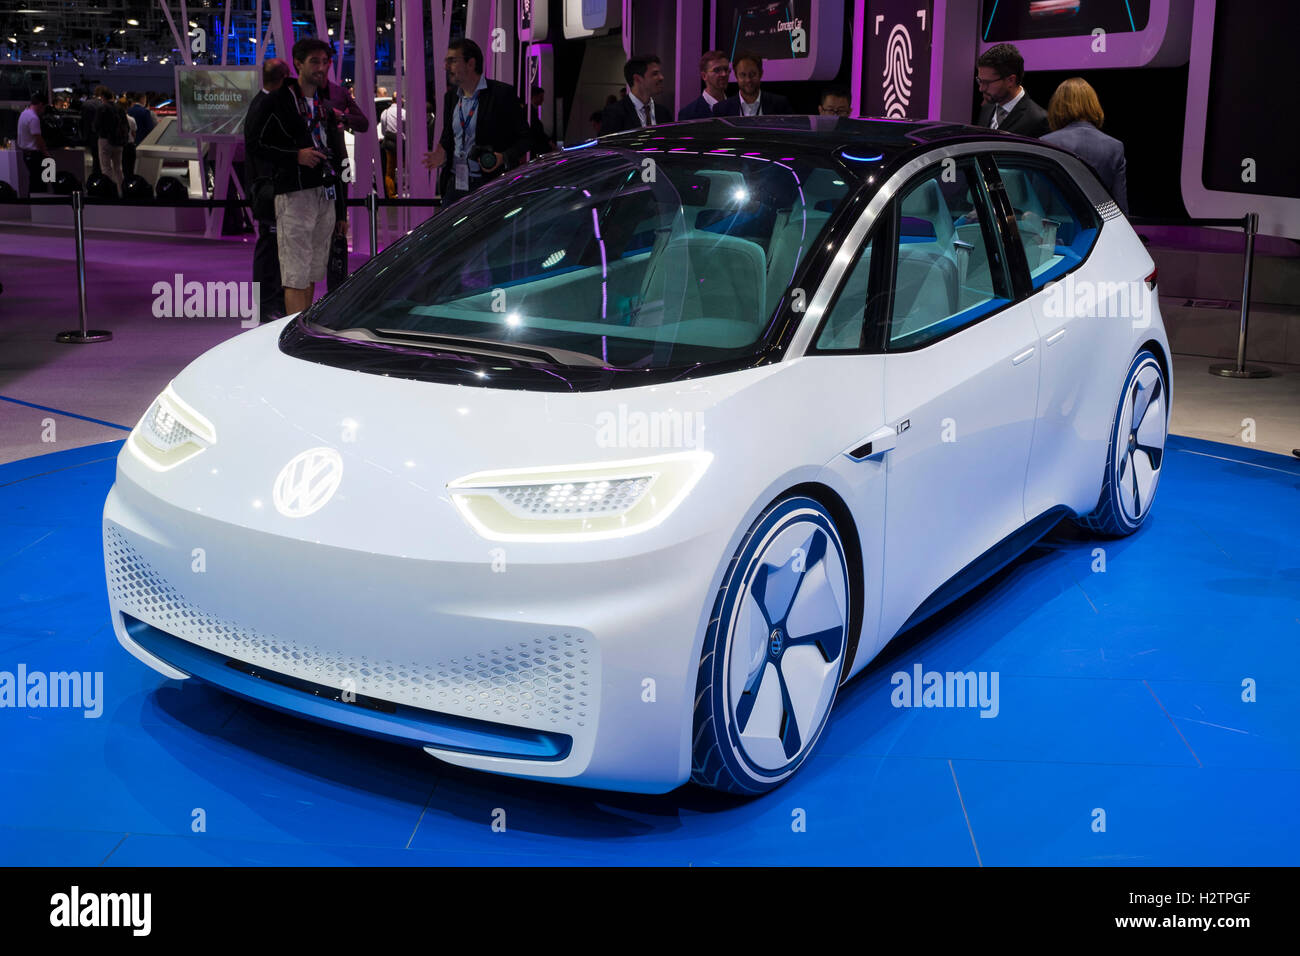 New Volkswagen ID electric plug-in concept vehicle at Paris Motor Show 2016 Stock Photo